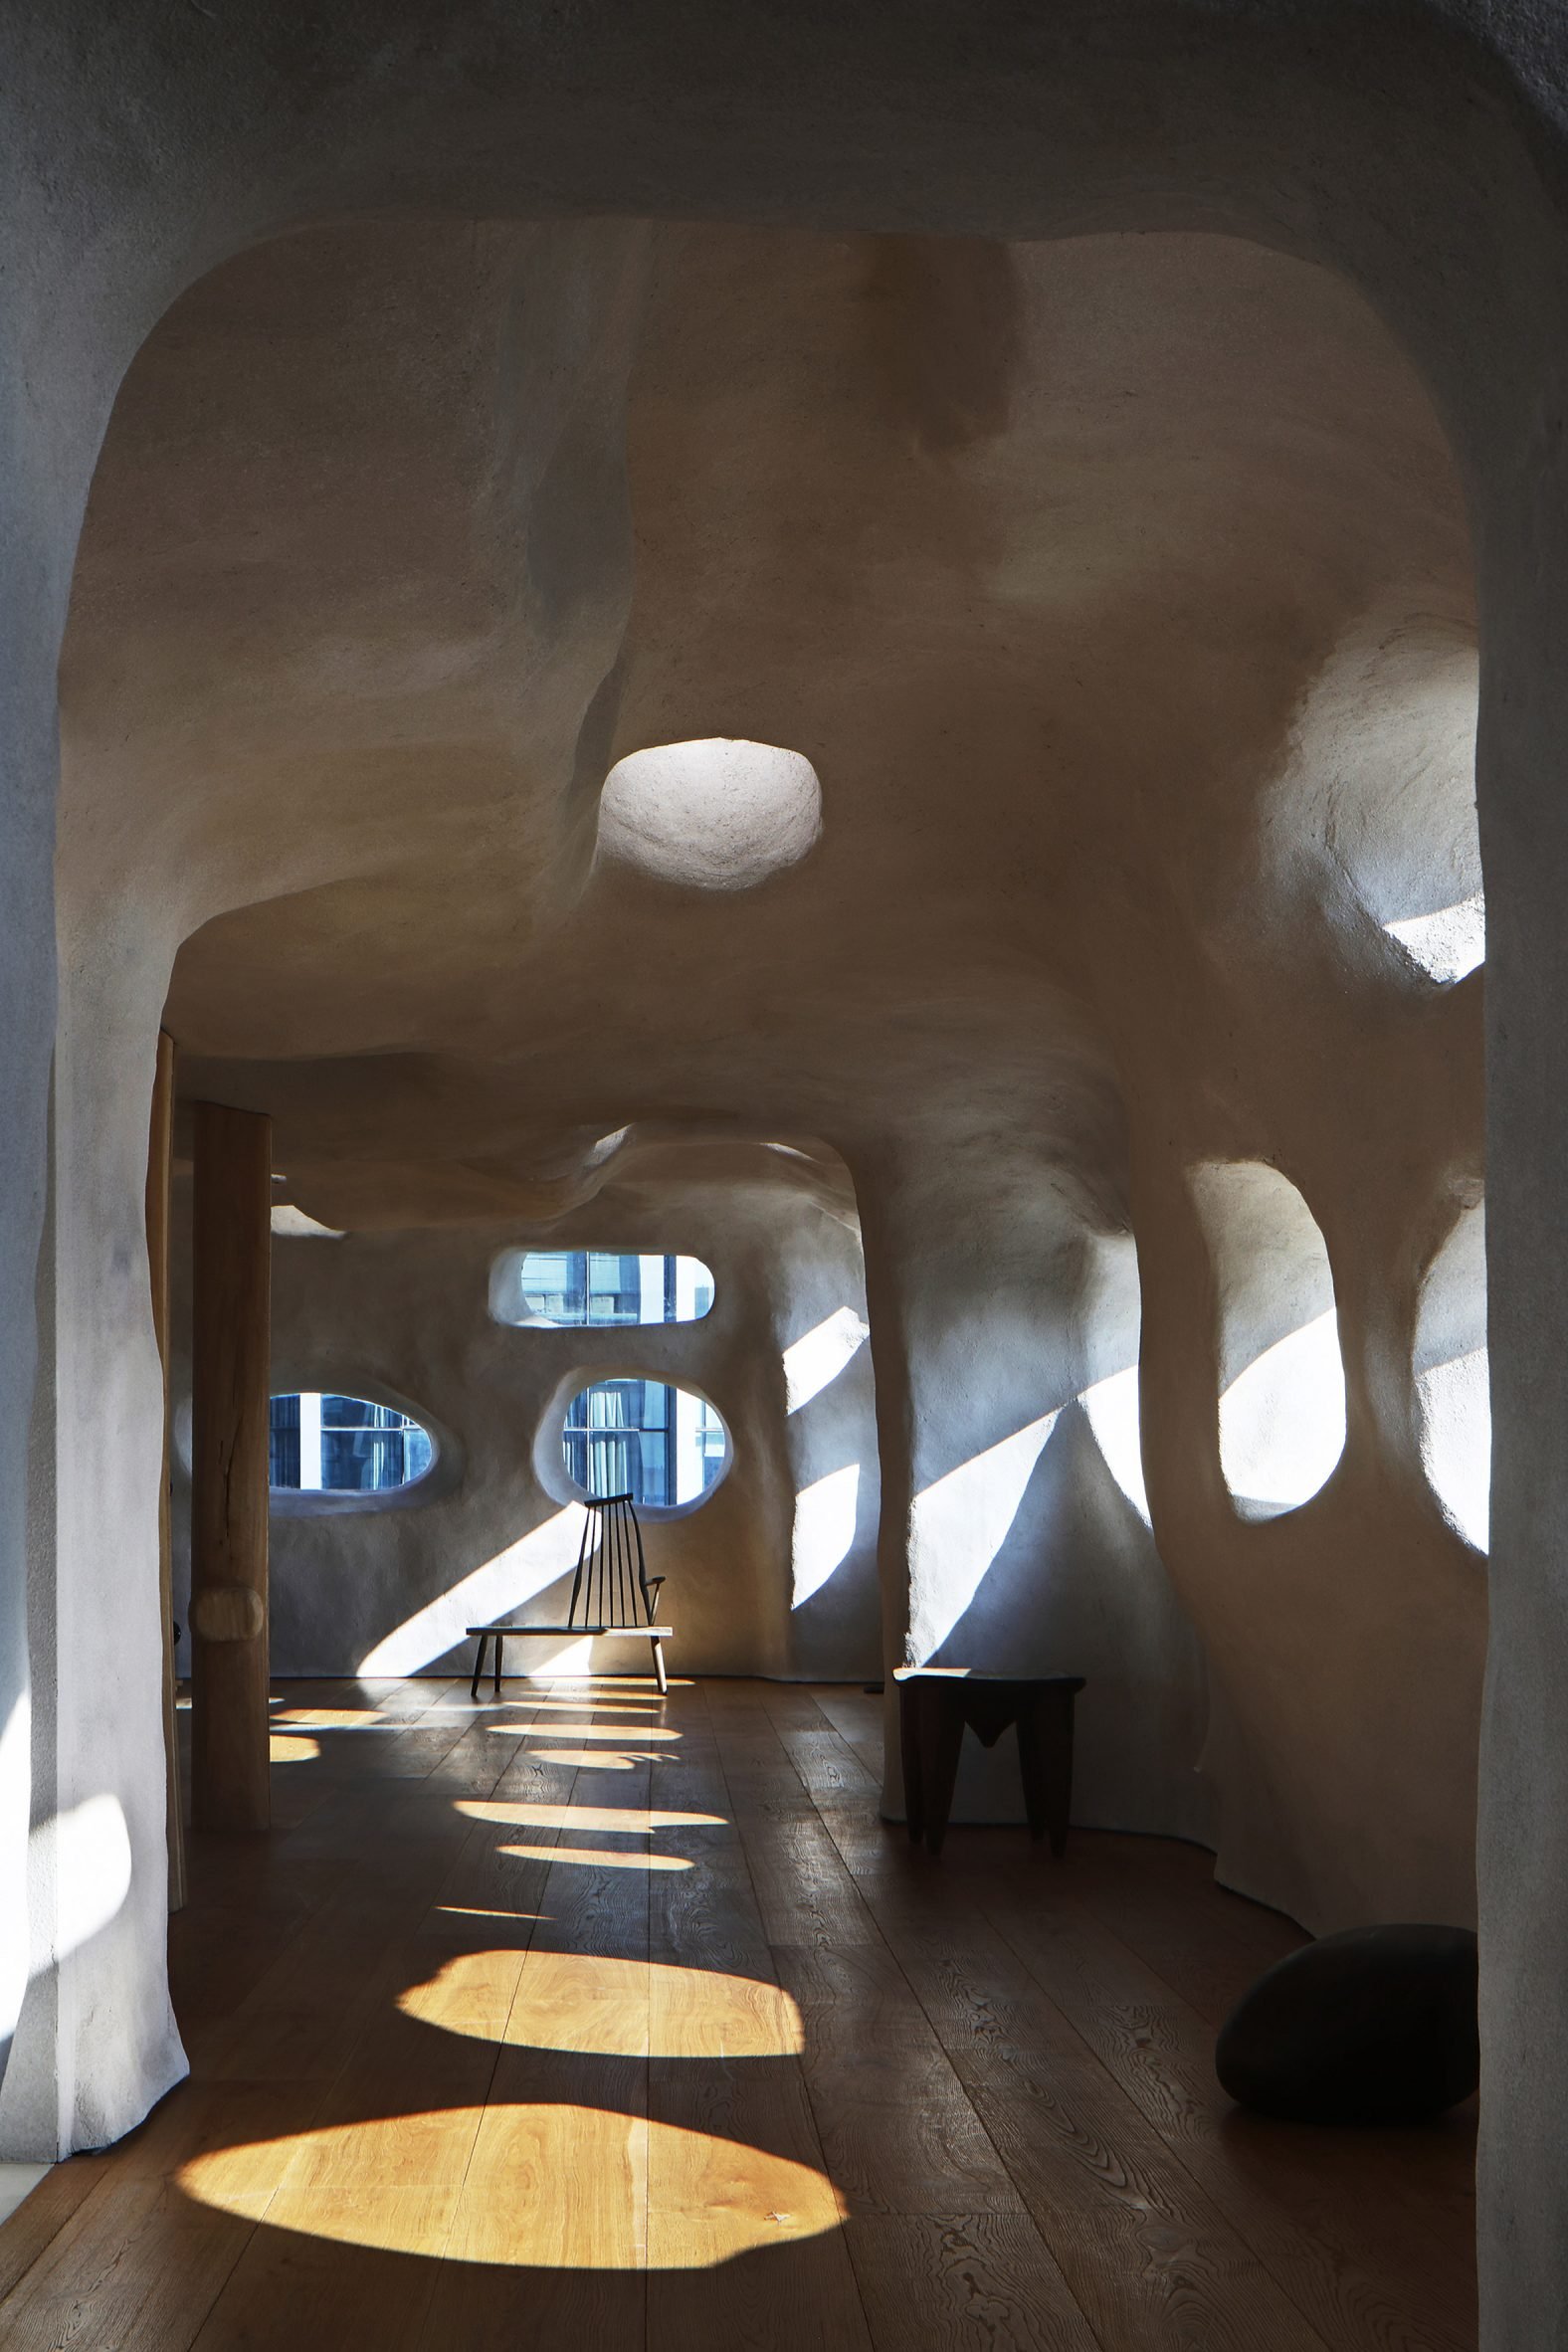 T.T. Pilates studio with rock-like walls and ceilings and rounded openings funnelling light onto a wooden floor